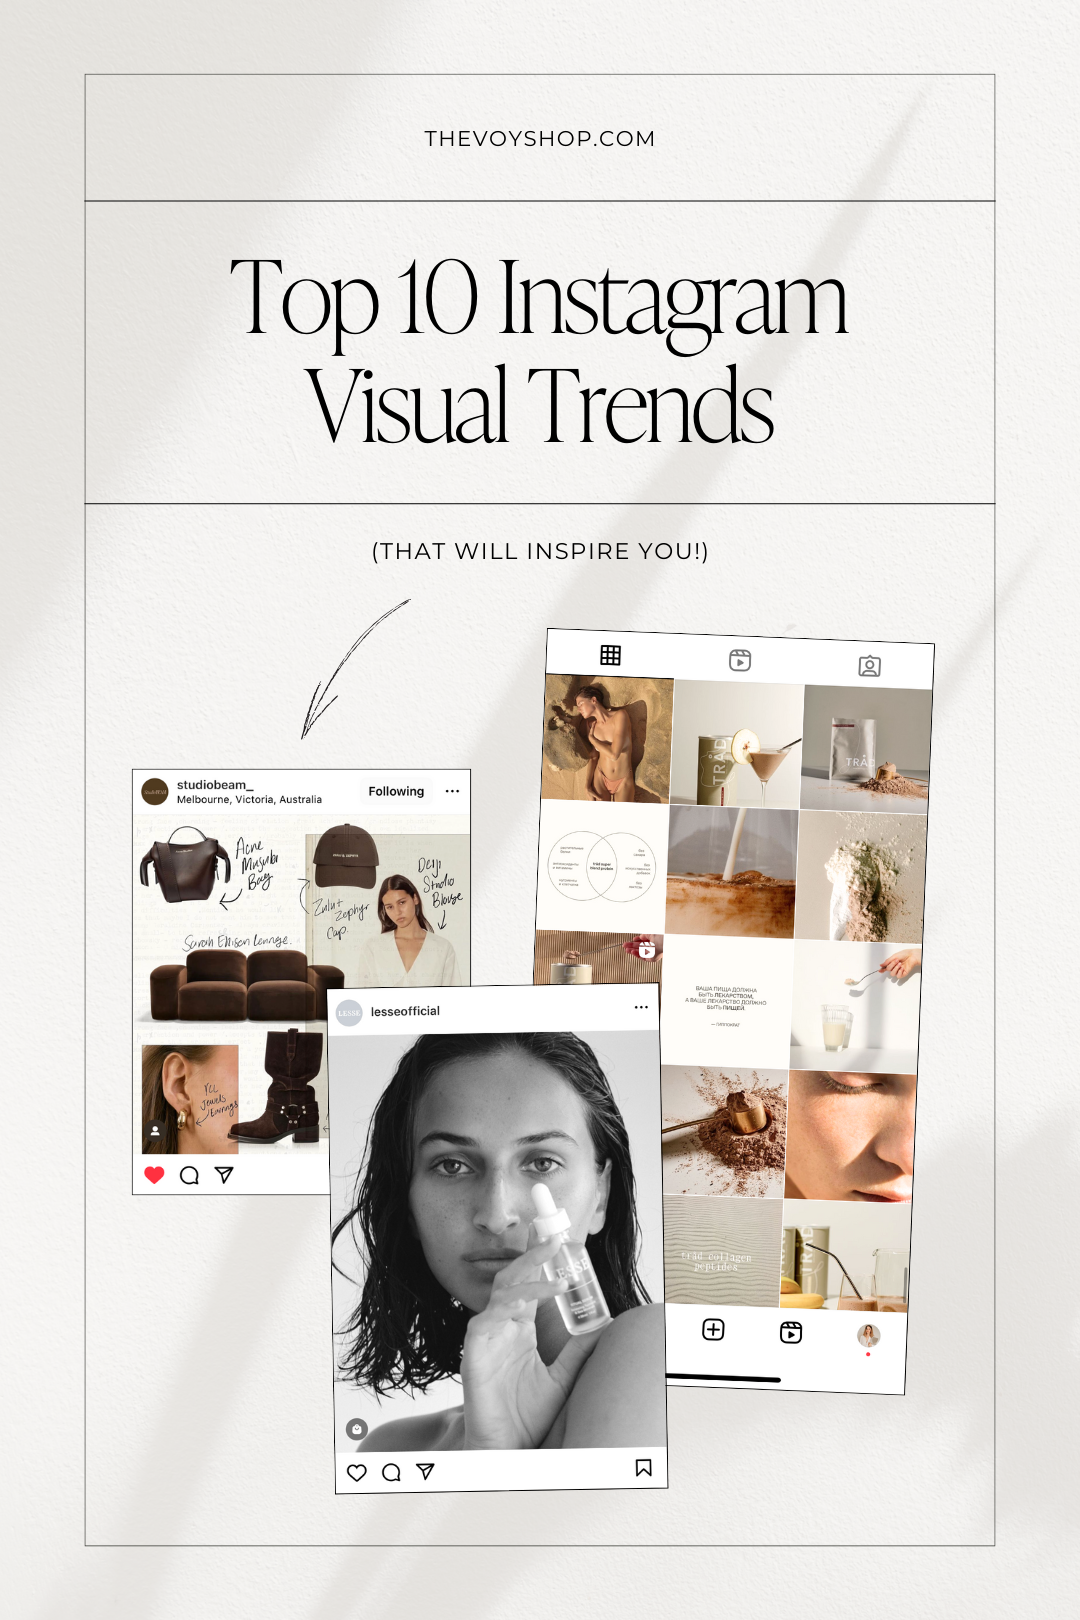 Top 10 Instagram Visual Trends (That Will Inspire You!)